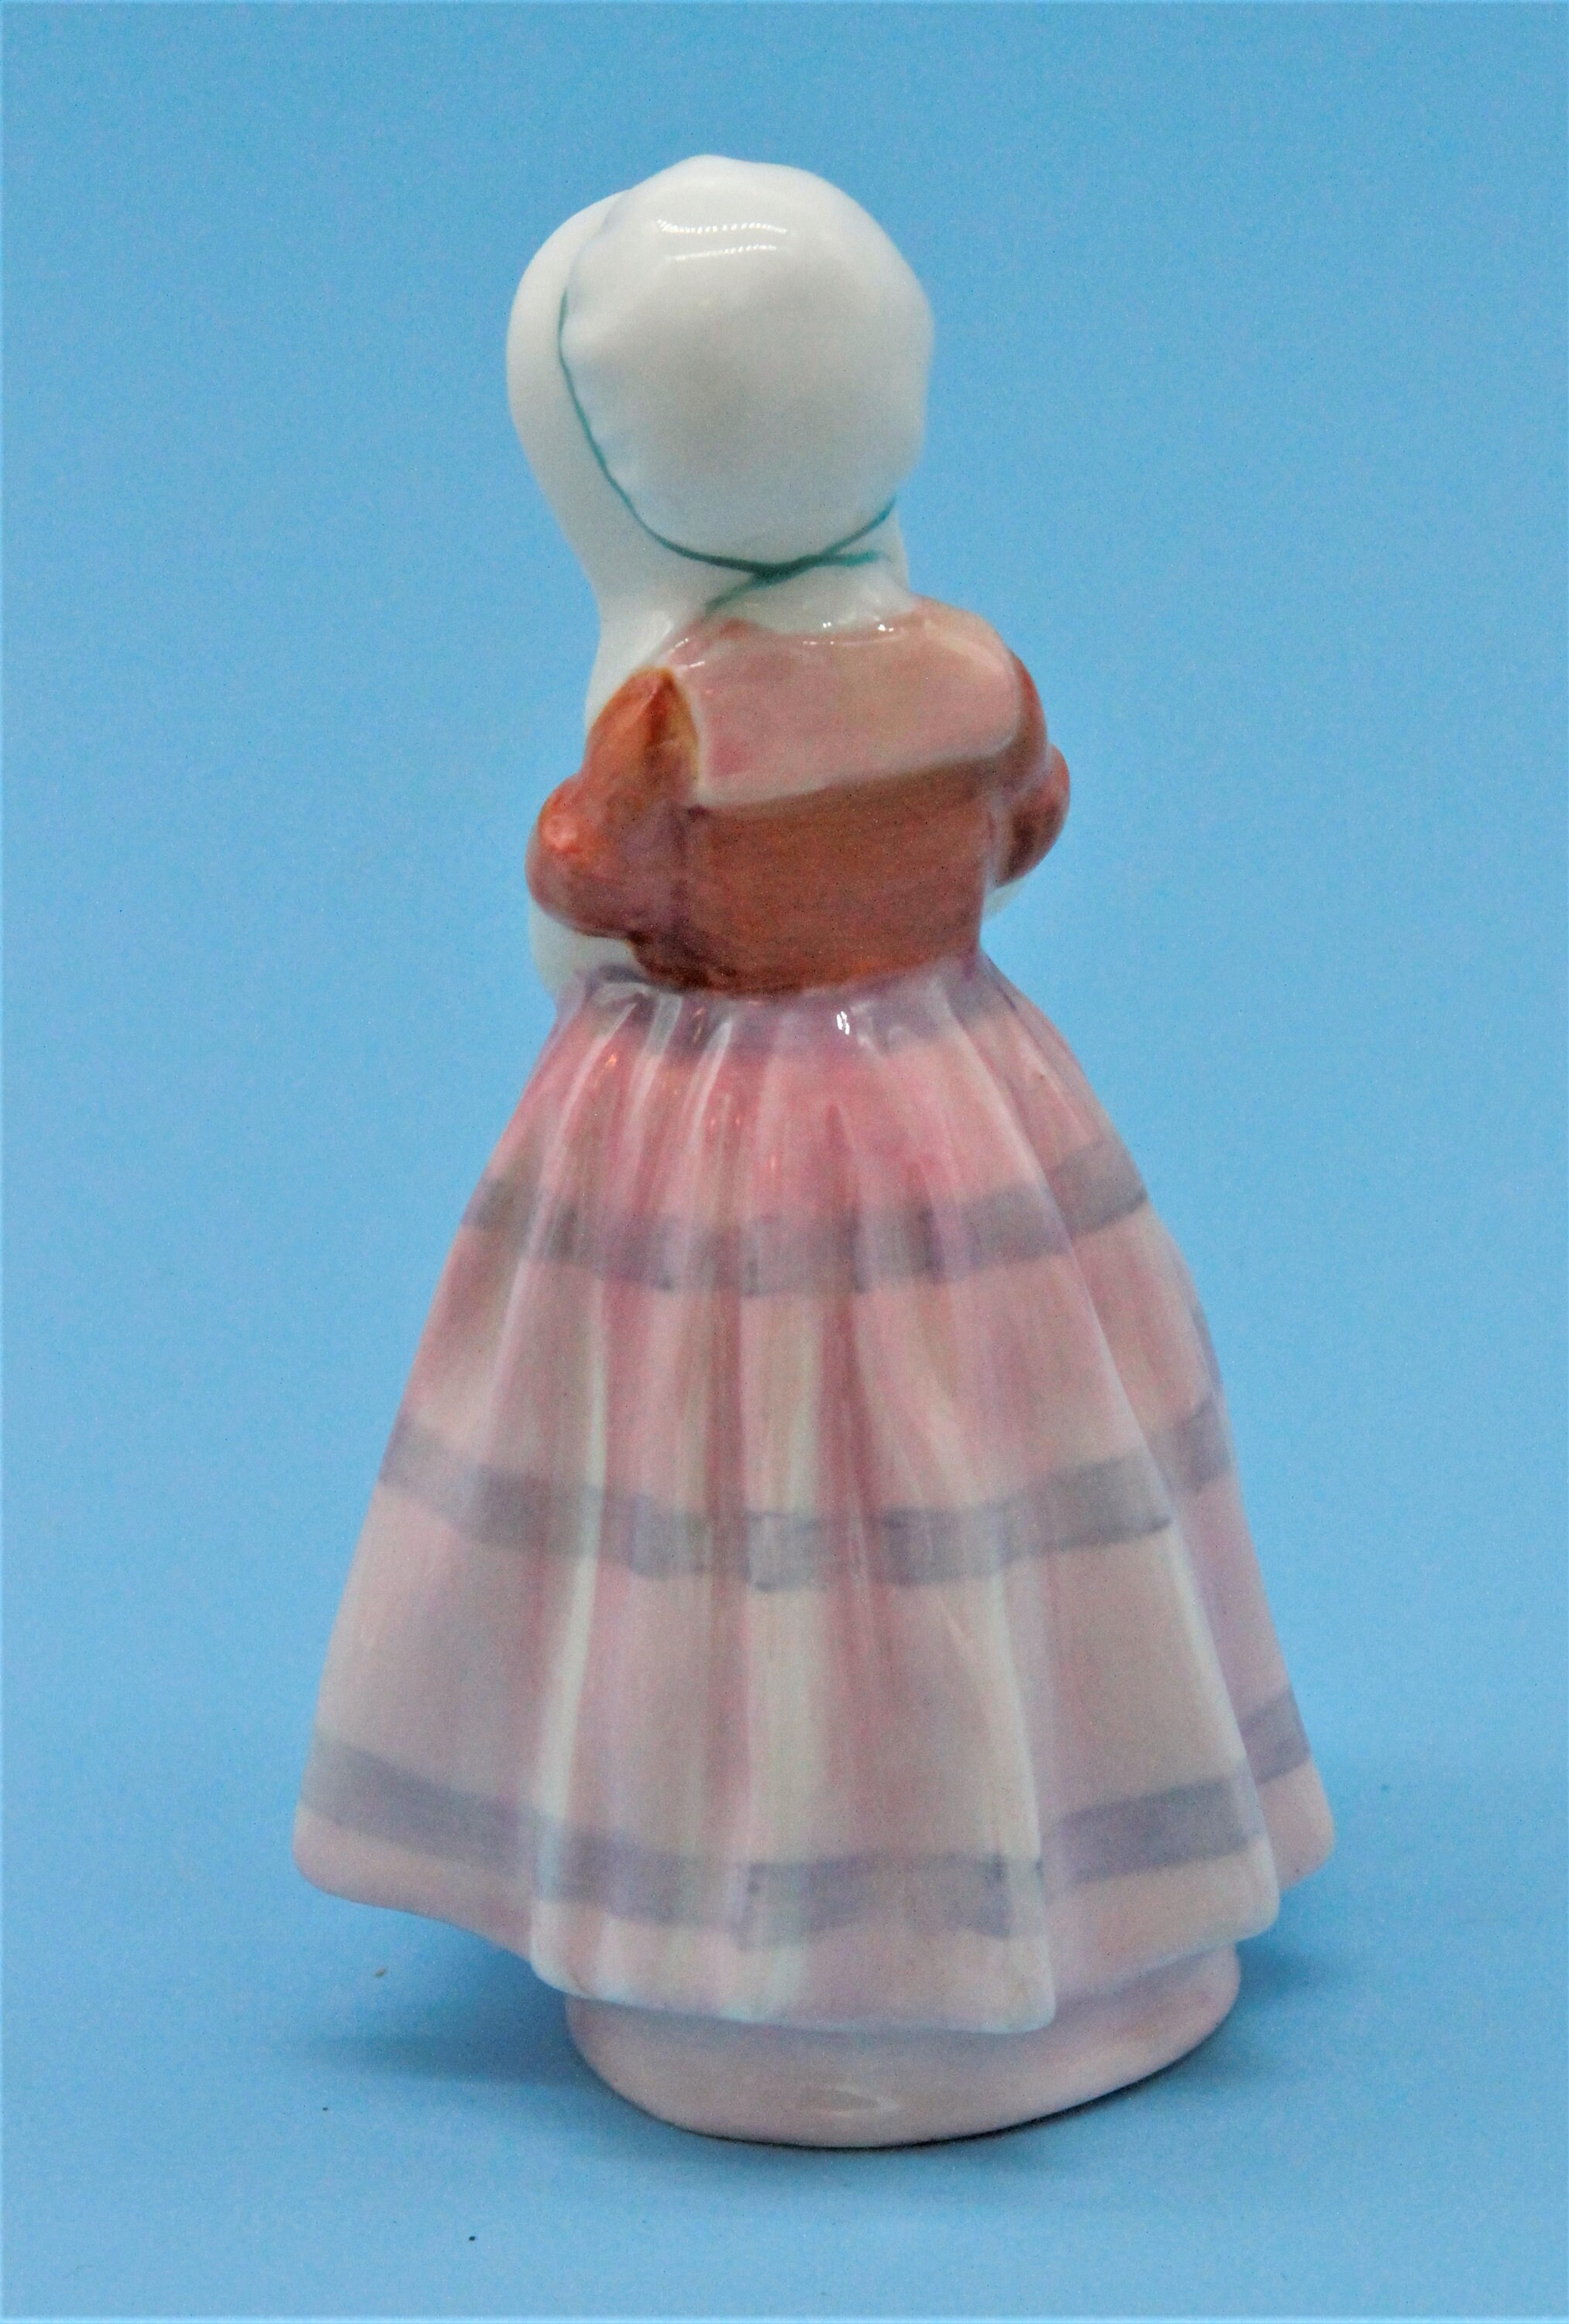 Royal Doulton TOOTLES #1680 Porcelain Figurine 4.5 tall Signed